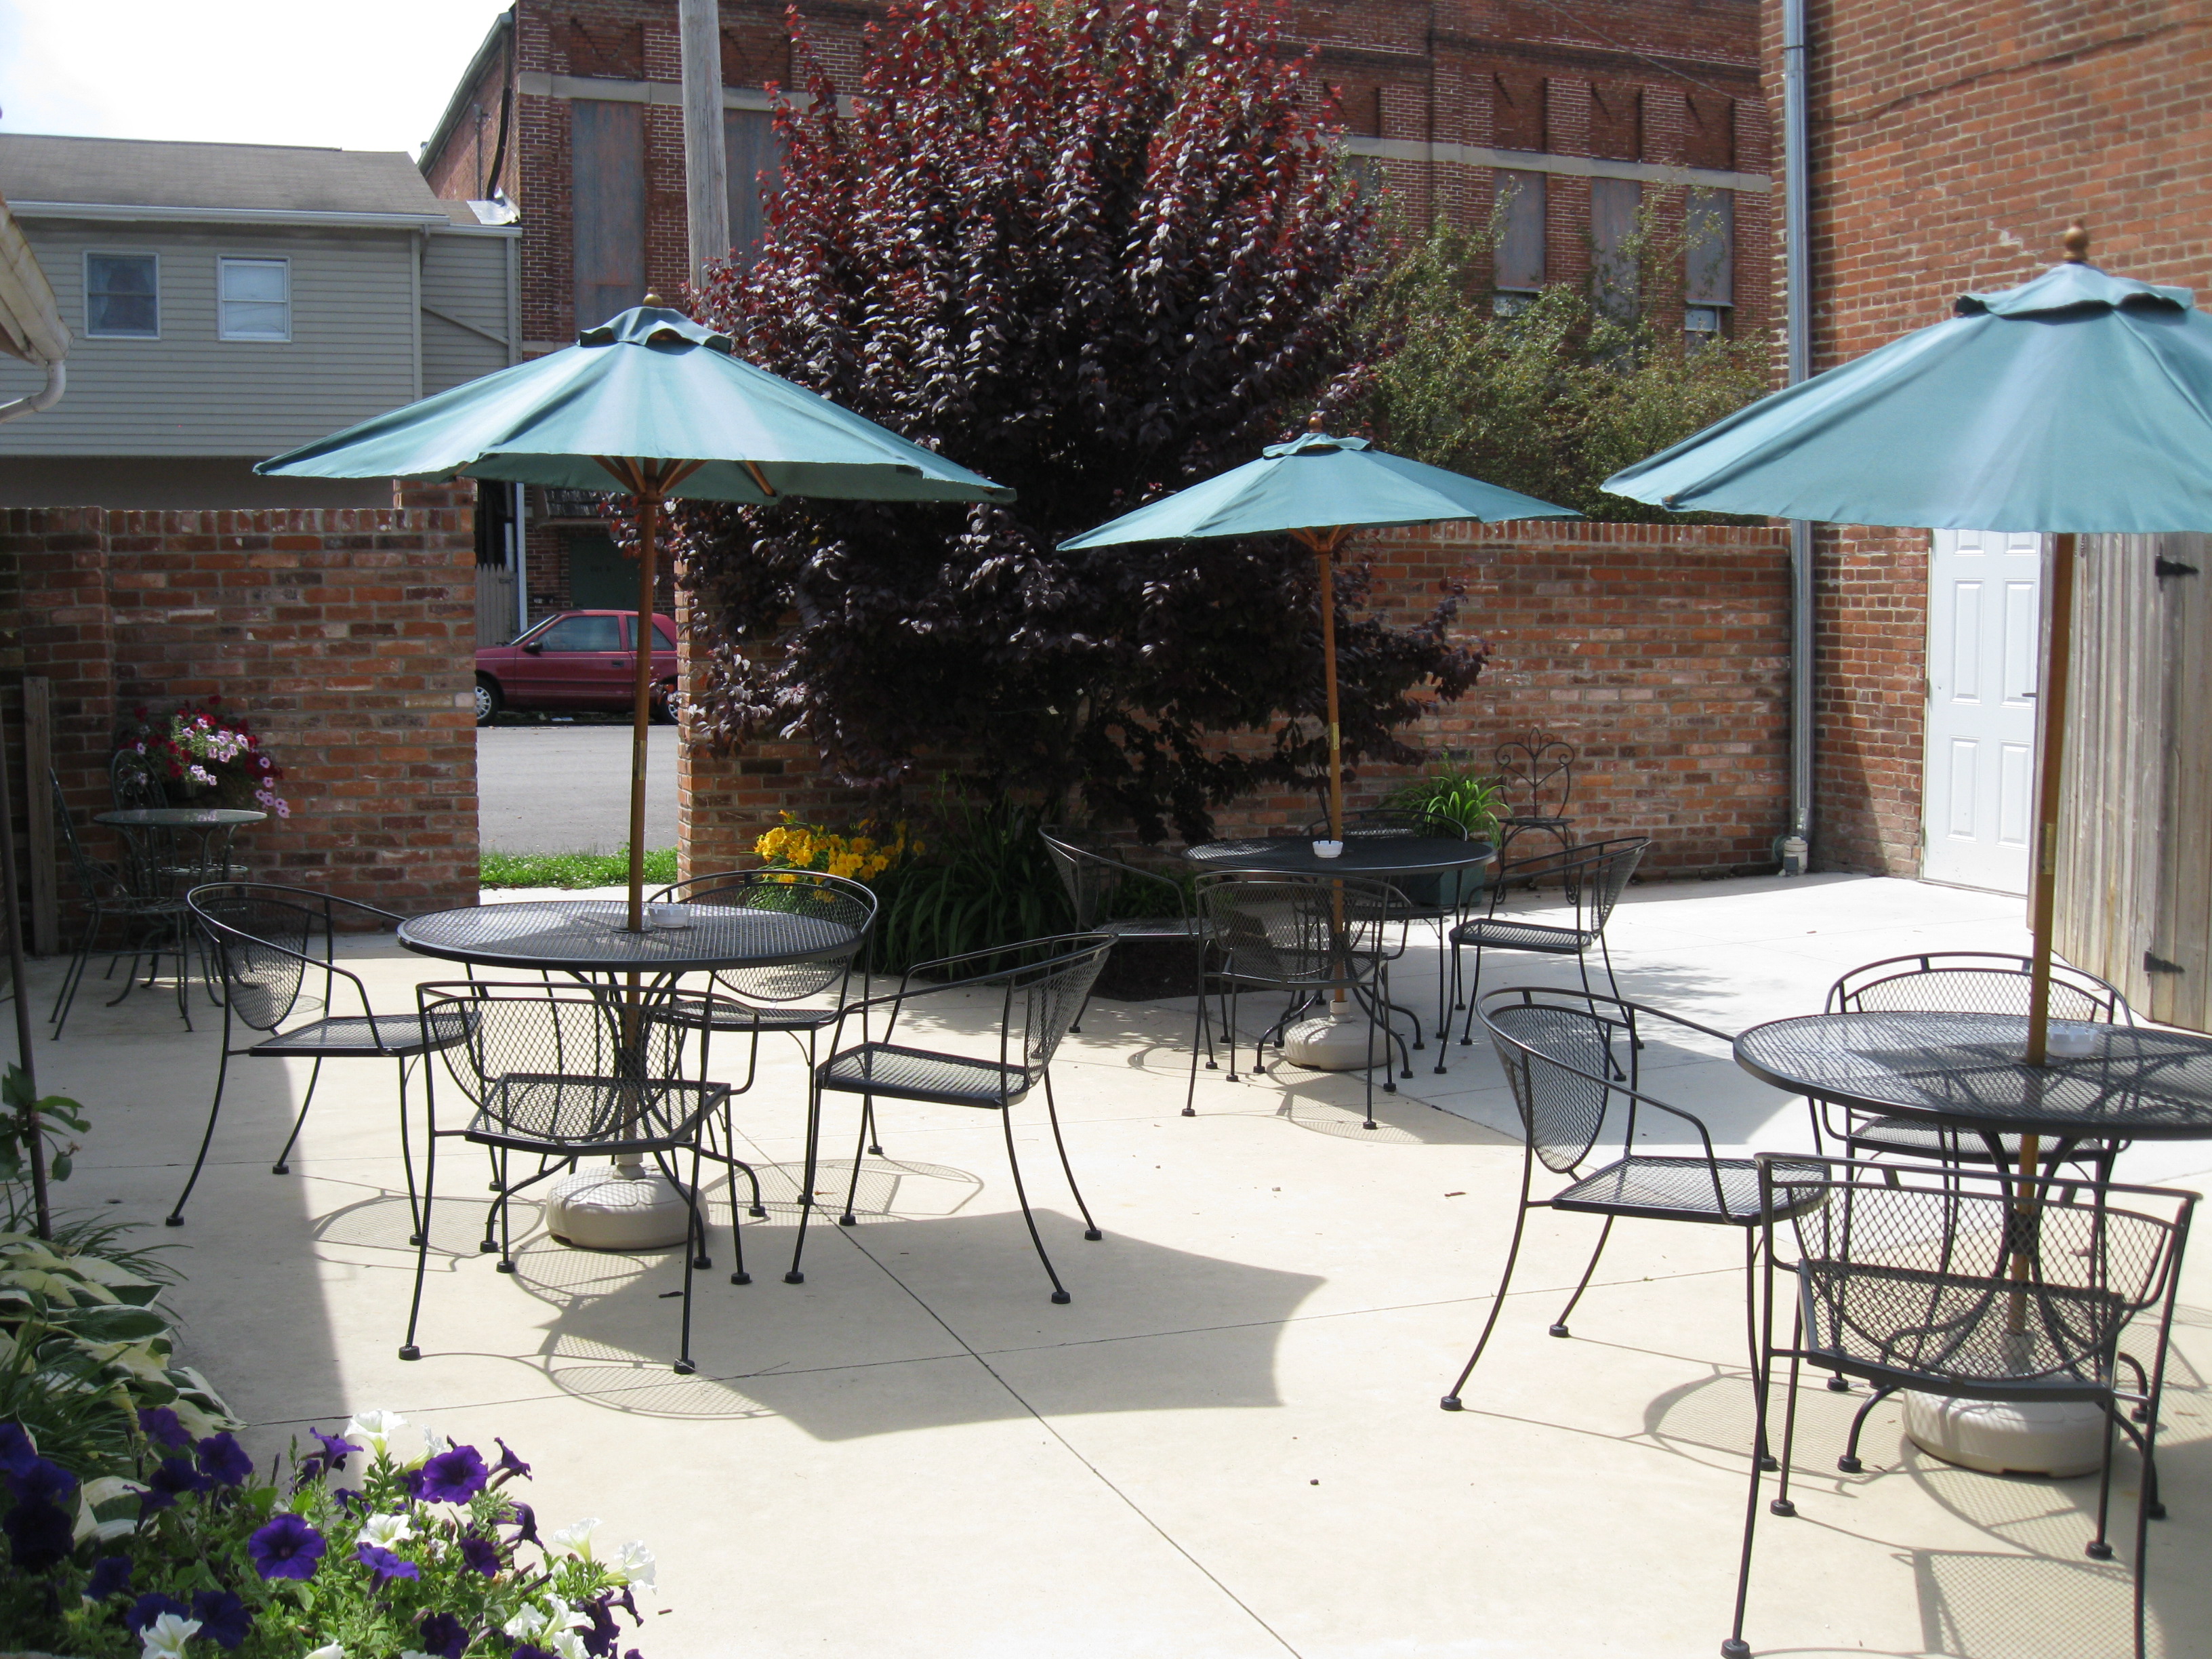 Newly renovated outside courtyard area